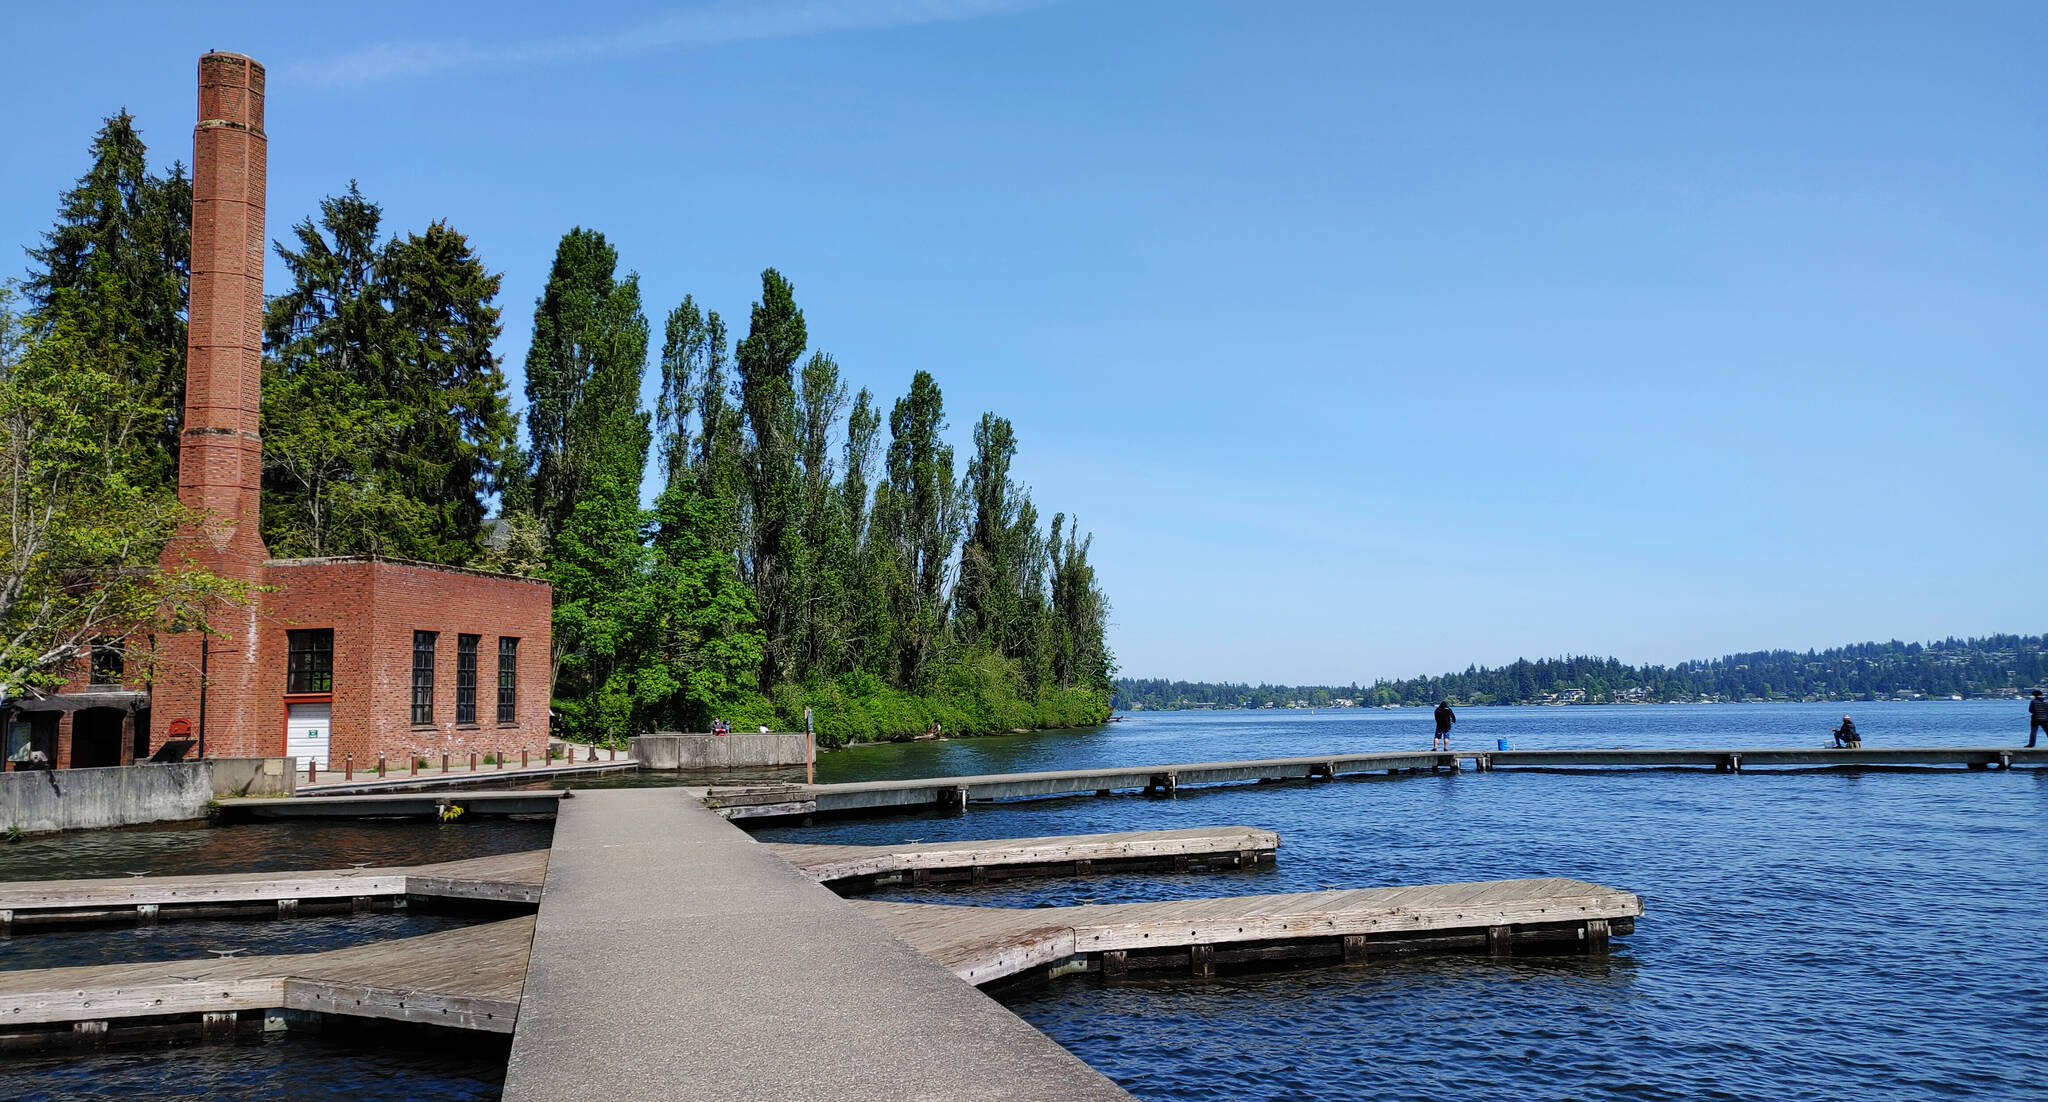 The Luther Burbank Park docks are on the city’s docket for improvements. Andy Nystrom/ staff photo